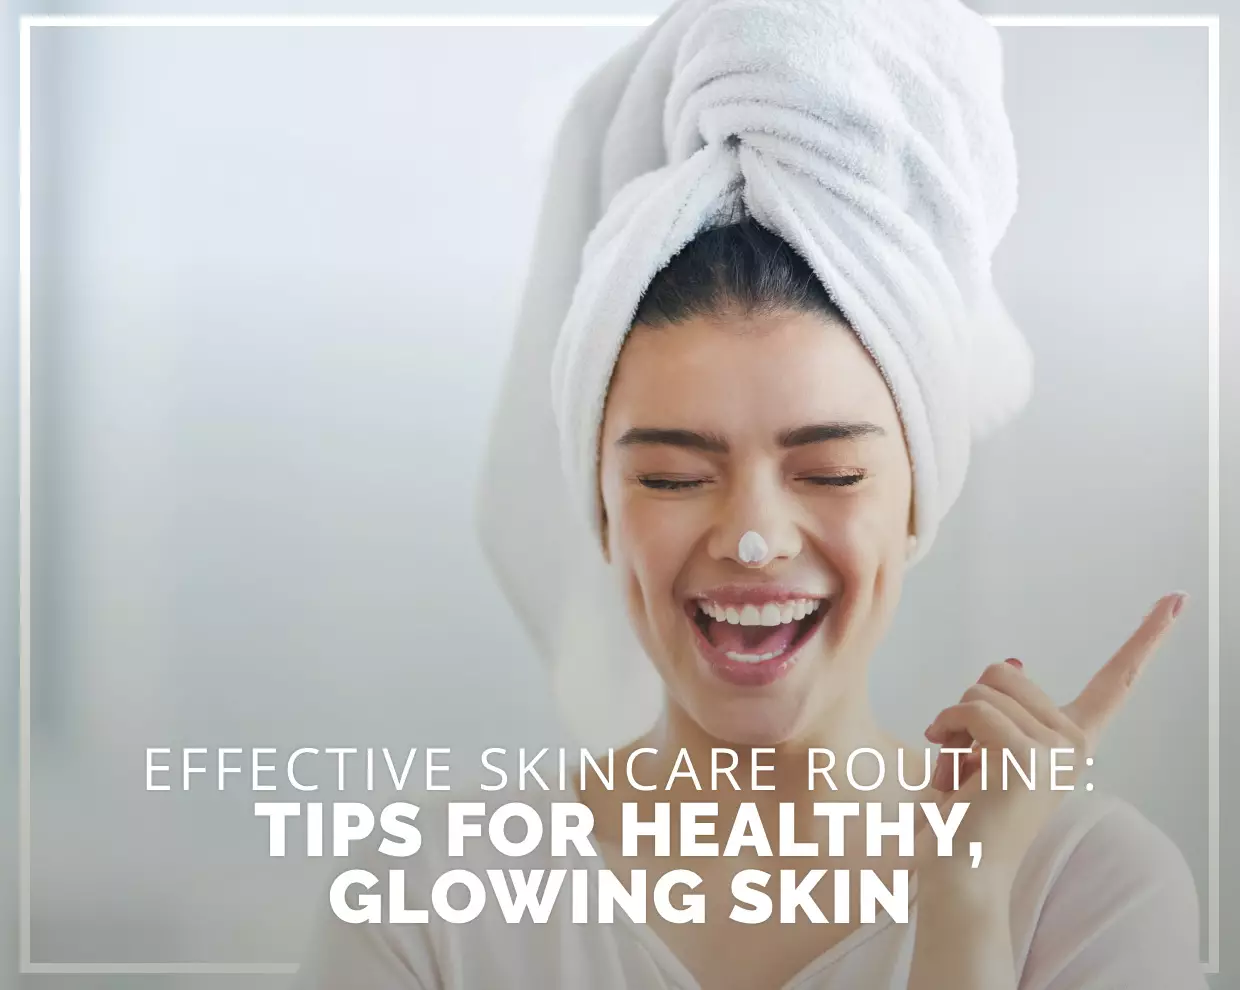 Effective Skincare Routine: Tips for Healthy, Glowing Skin 